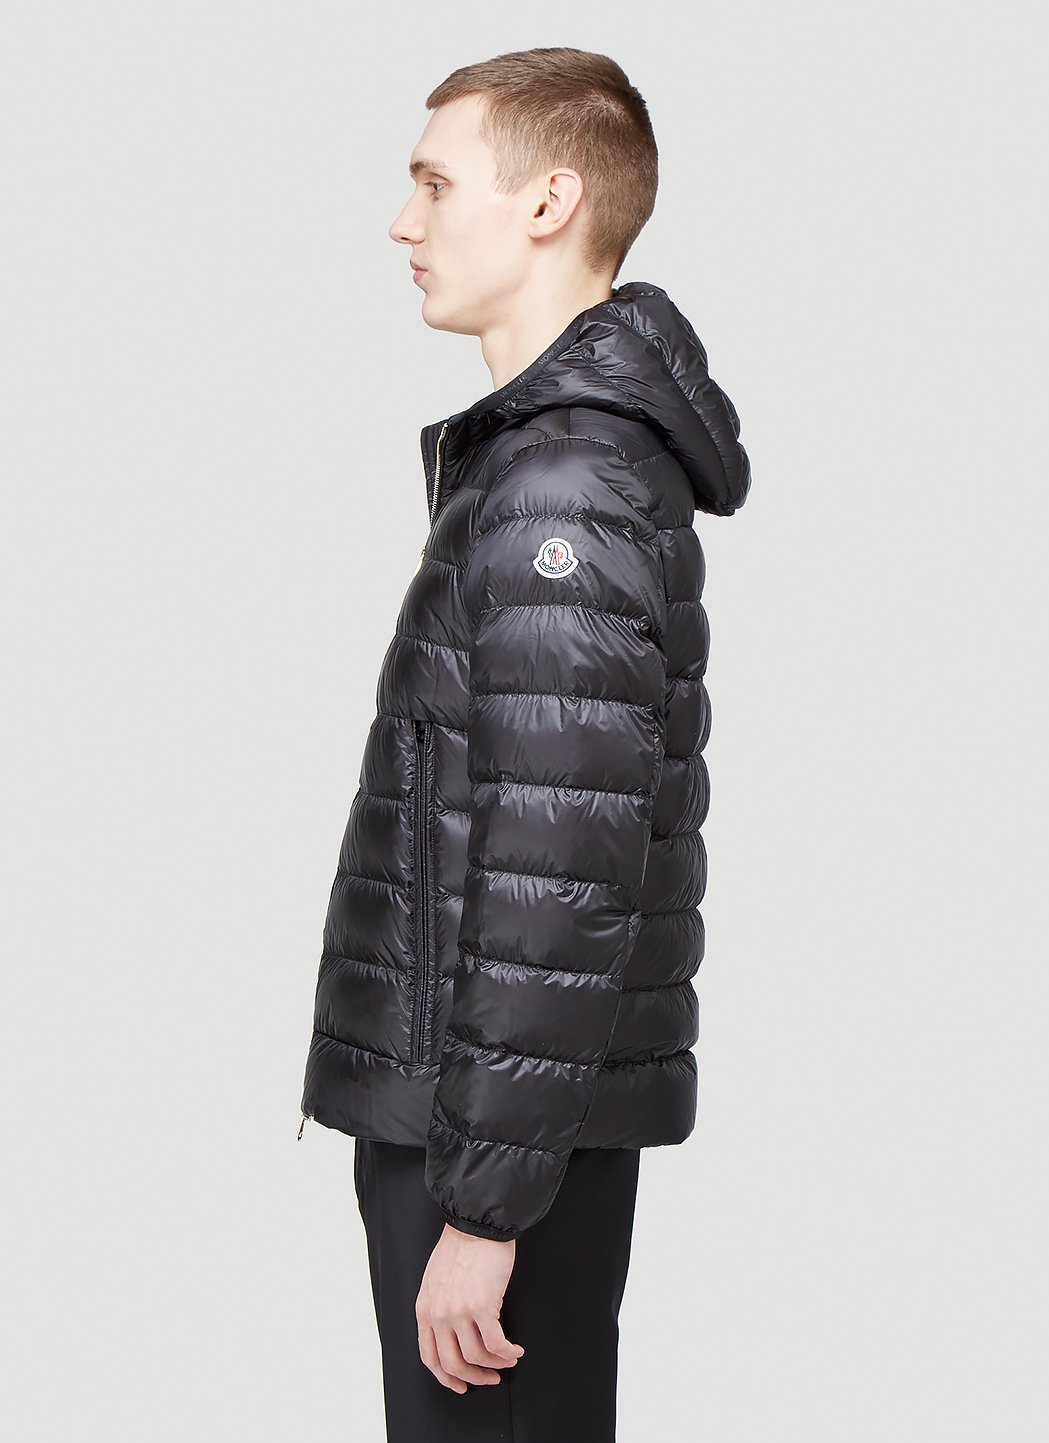 Moncler Men's Emas Quilted Jacket in Black | LN-CC